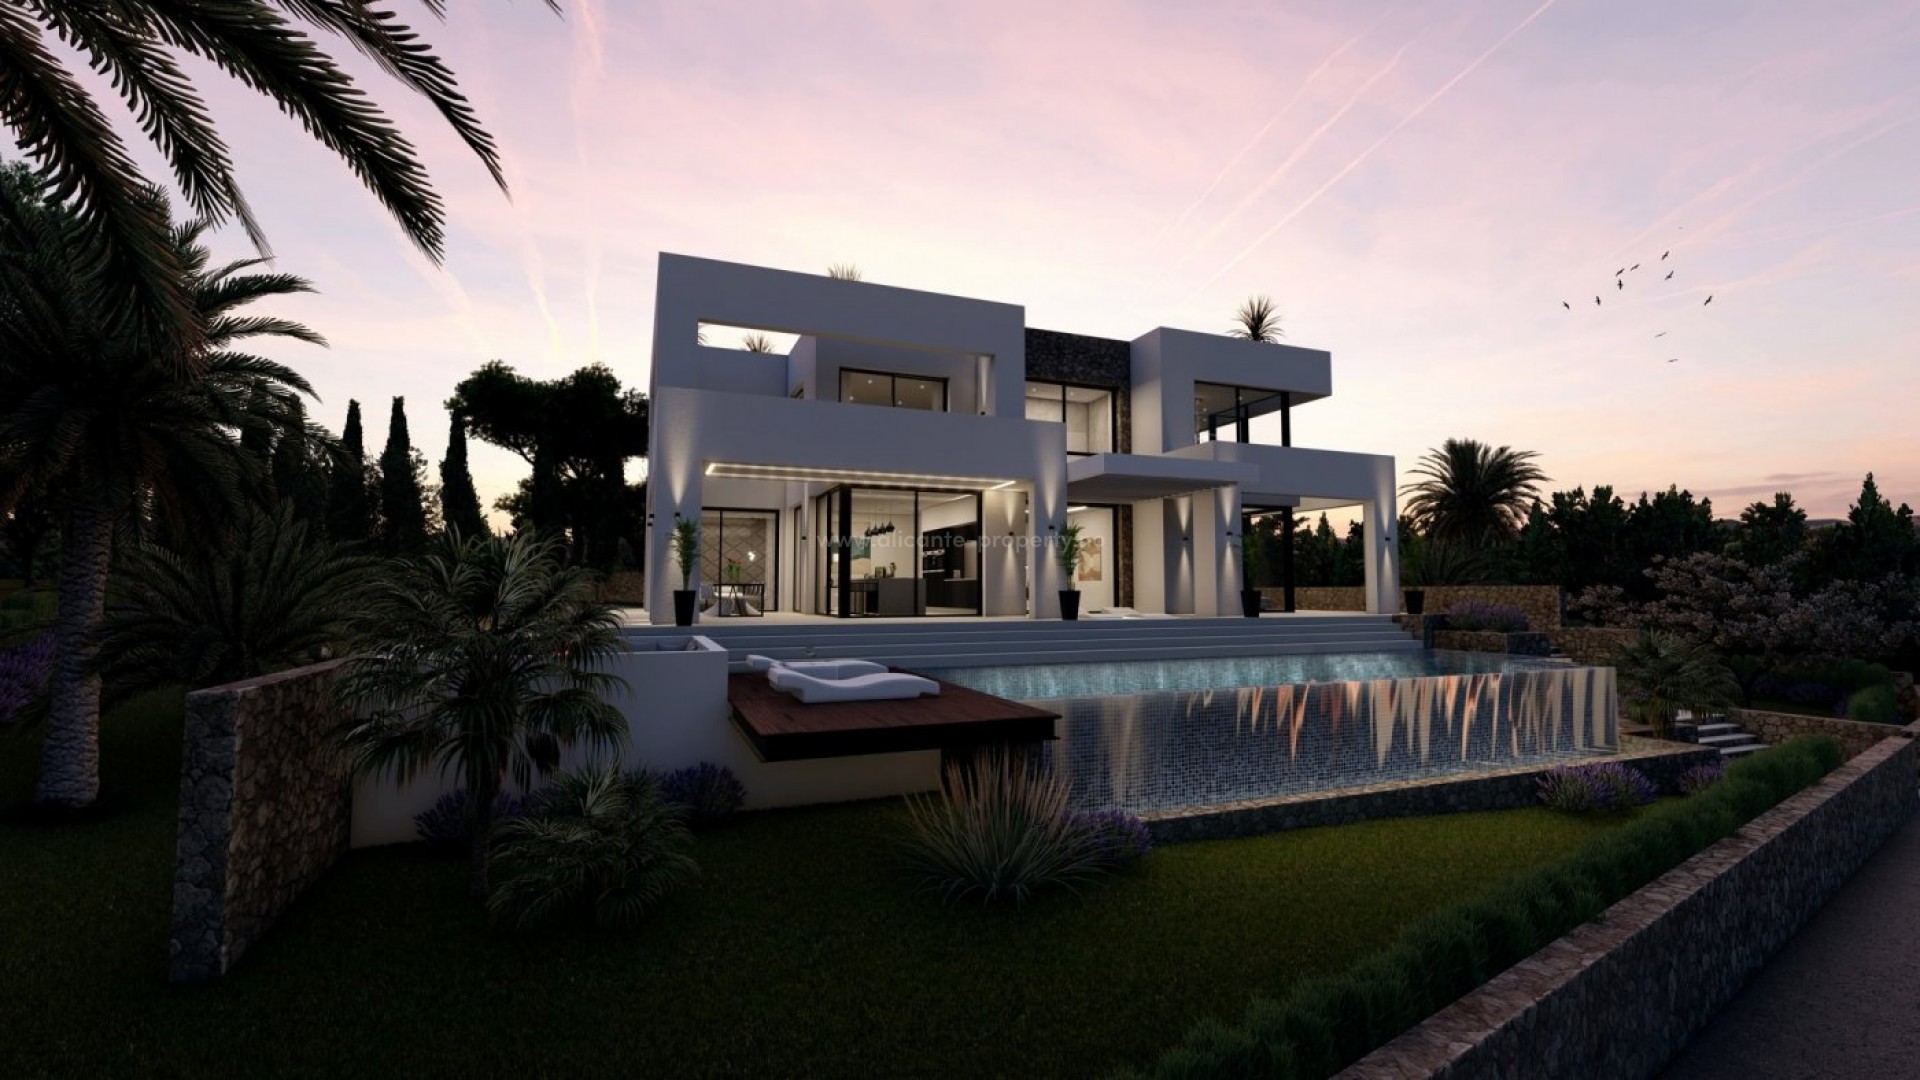 Luxury villa in Benissa with 4 bedrooms and 4 bathrooms, large infinity pool, terraces, complete quality throughout the house